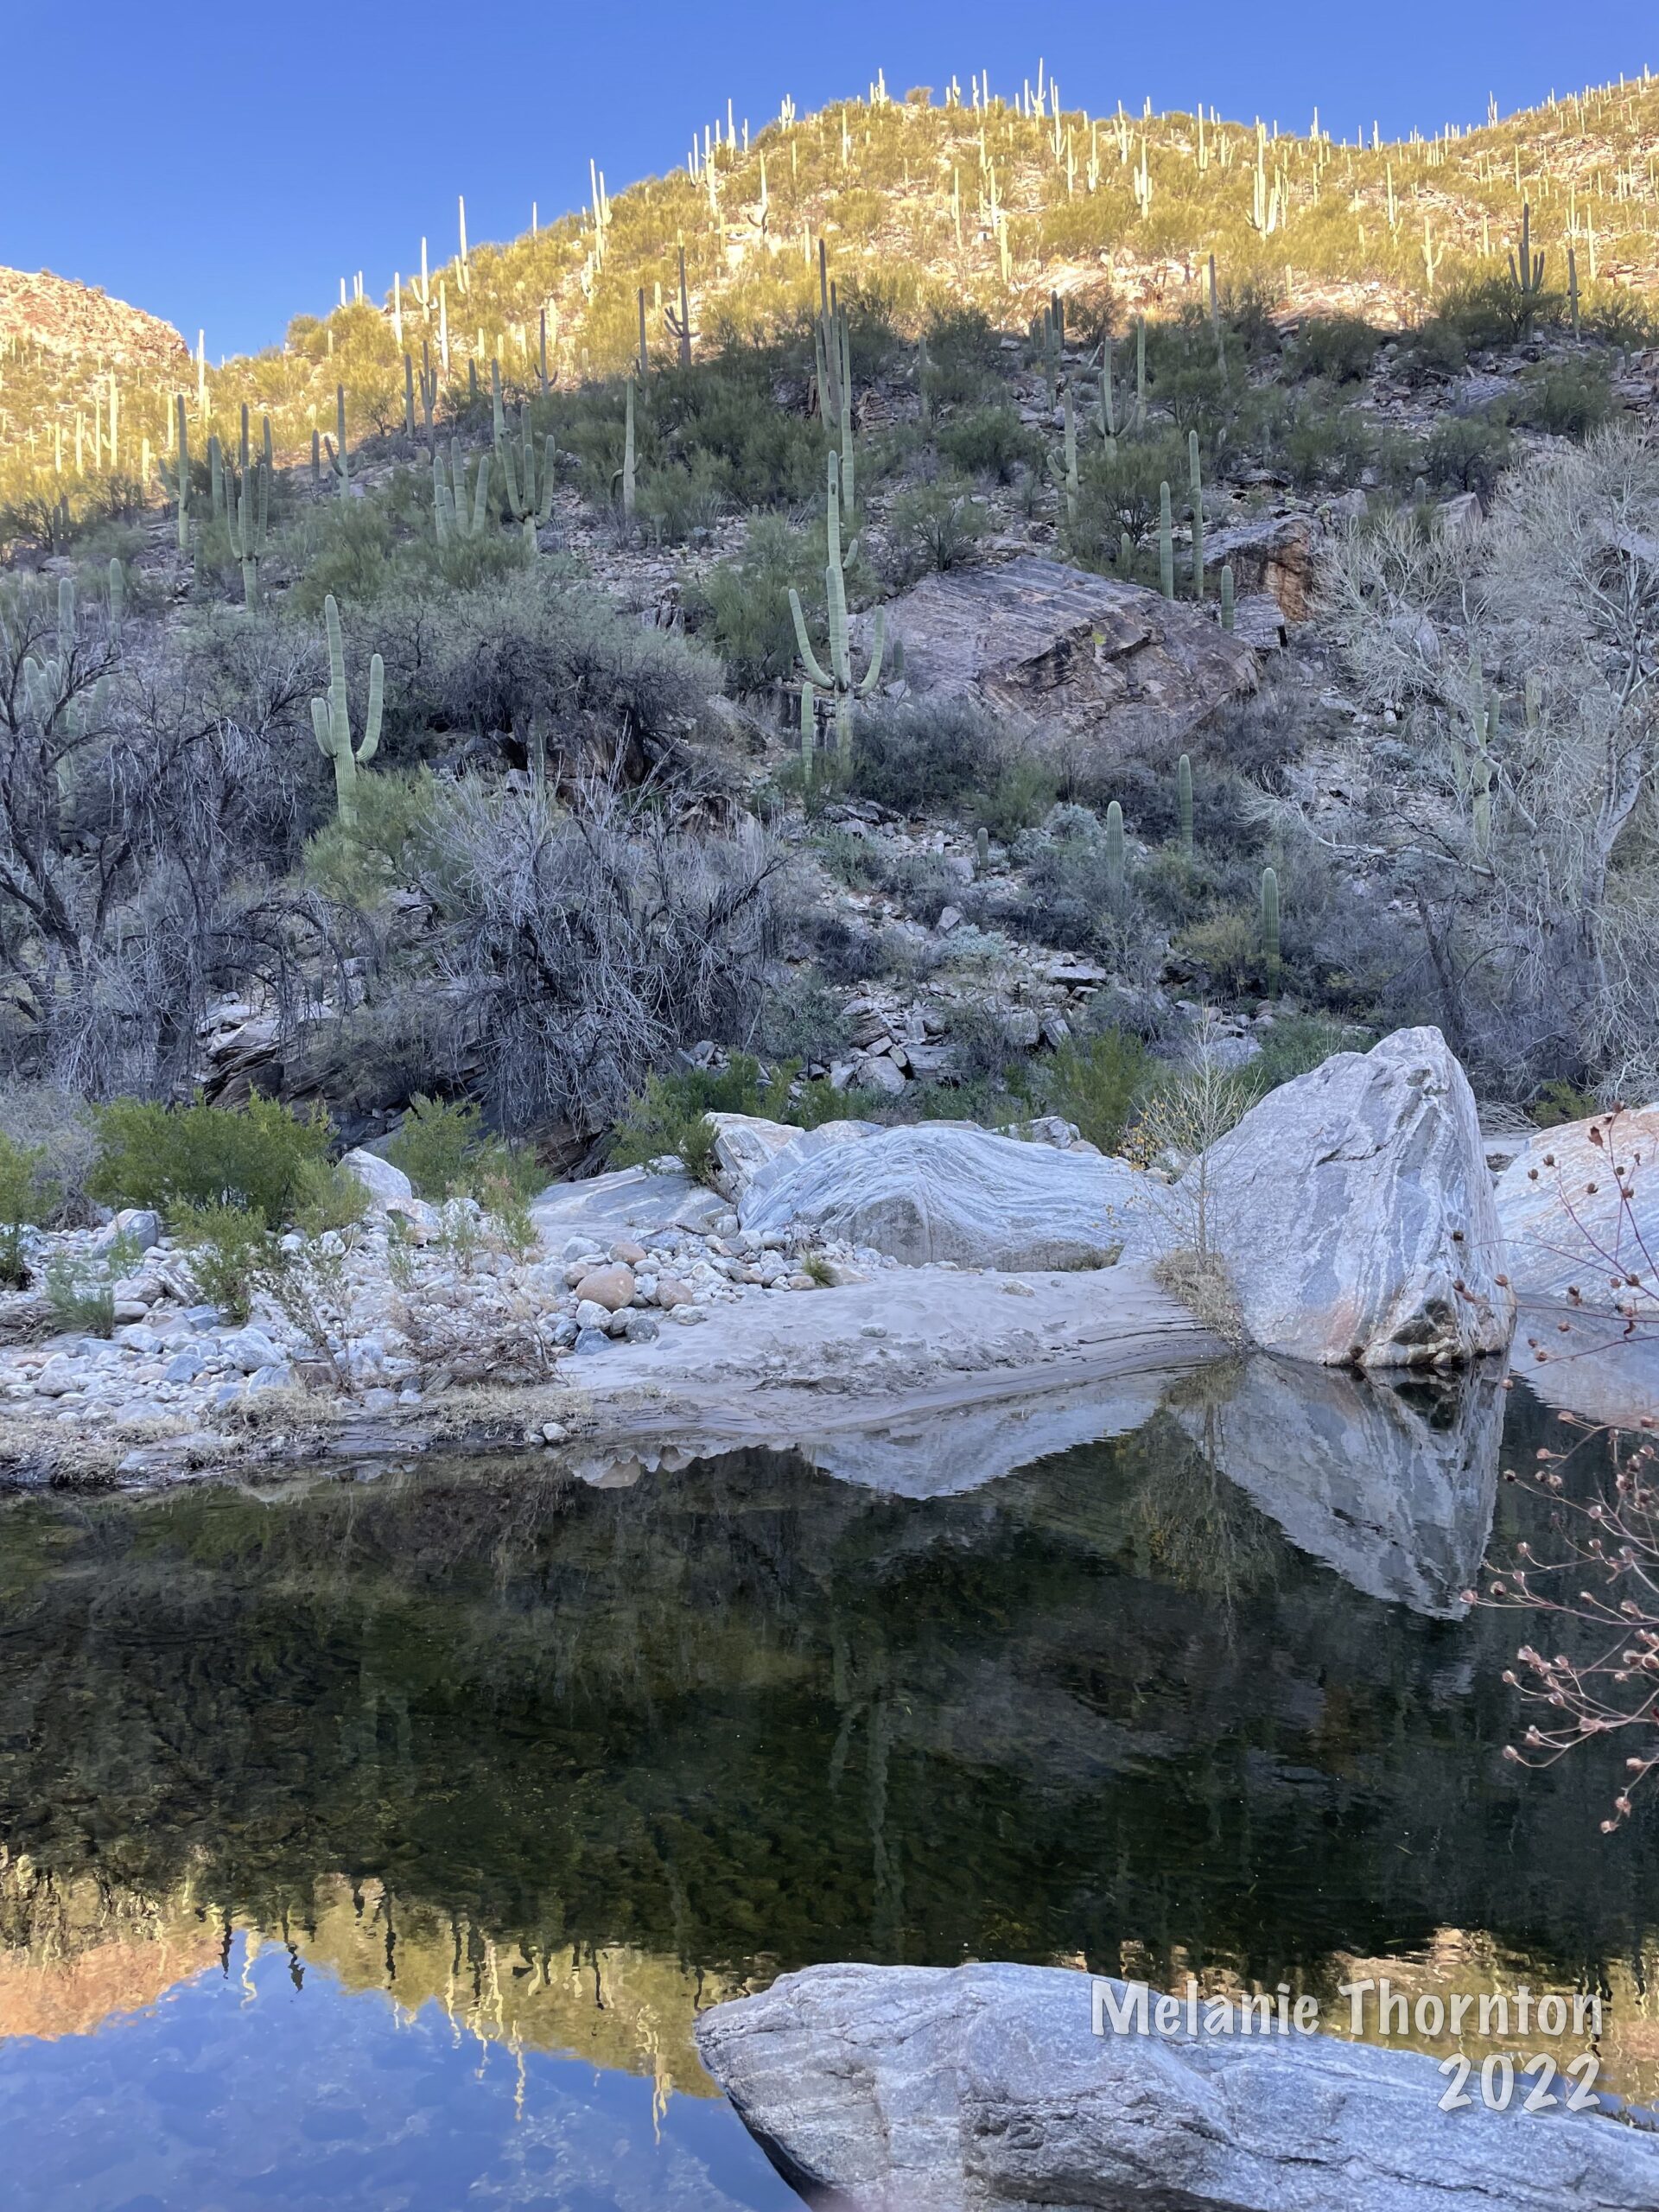 A hill rises above the water with cactus growing all over. The cactus are also reflected in the water below.